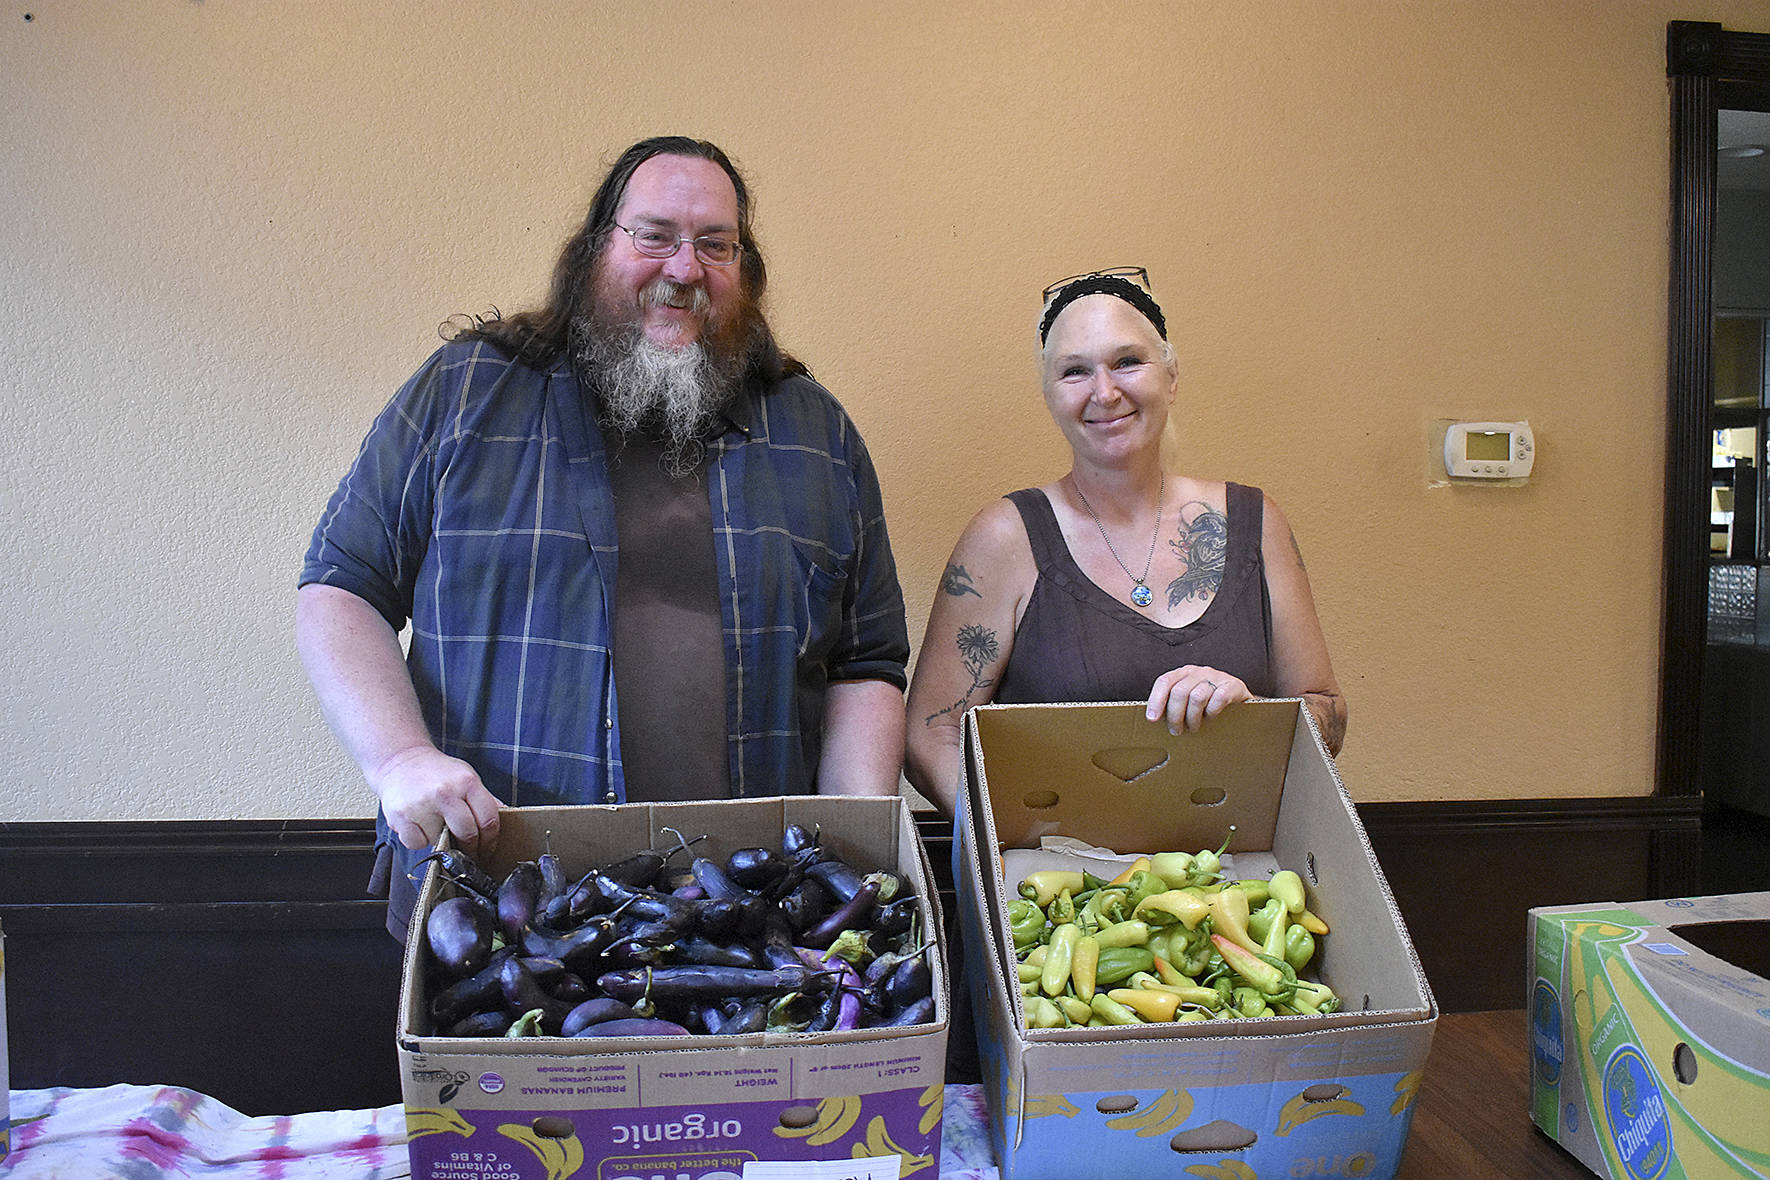 Scott Kreidermacher, left, and Lara Randolph, right, hold up the food that remains from a busy day at the Free Grocery Store, a new project from nonprofit Sustainable Renton, on Monday, Aug. 19. Photo by Haley Ausbun.